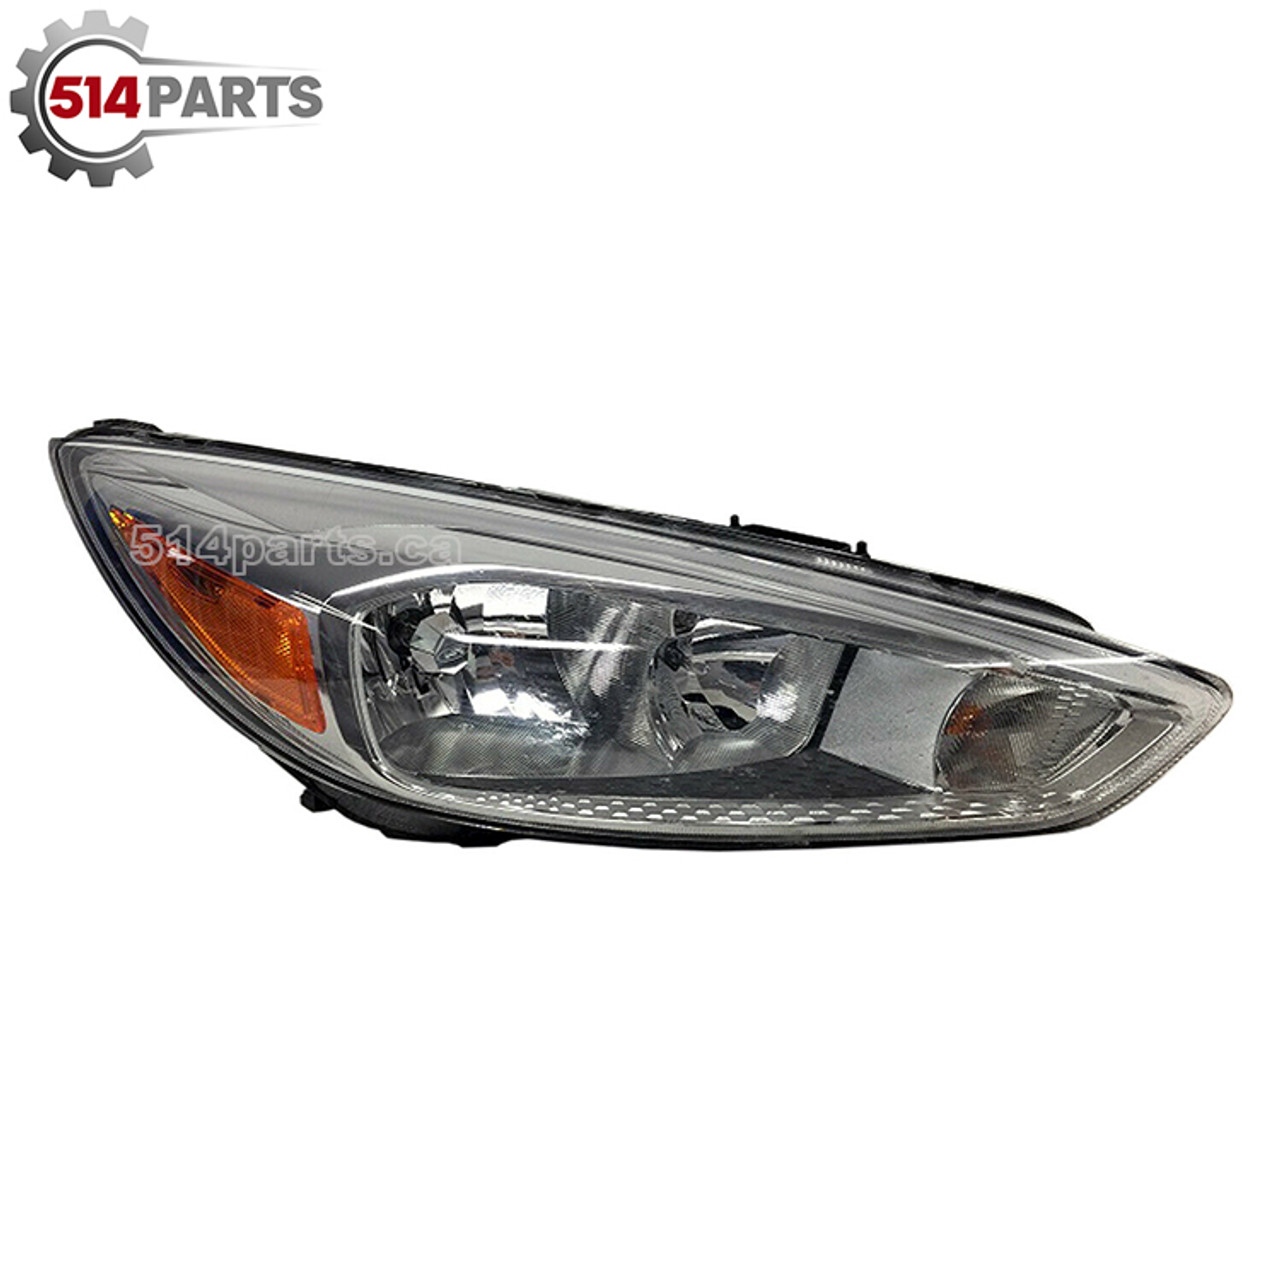 2015 - 2018 FORD FOCUS SEDAN/HATCHBACK HALOGEN HEADLIGHTS without DRL and LED with ALUMINUM BEZEL High Quality - PHARES AVANT Haute Qualite